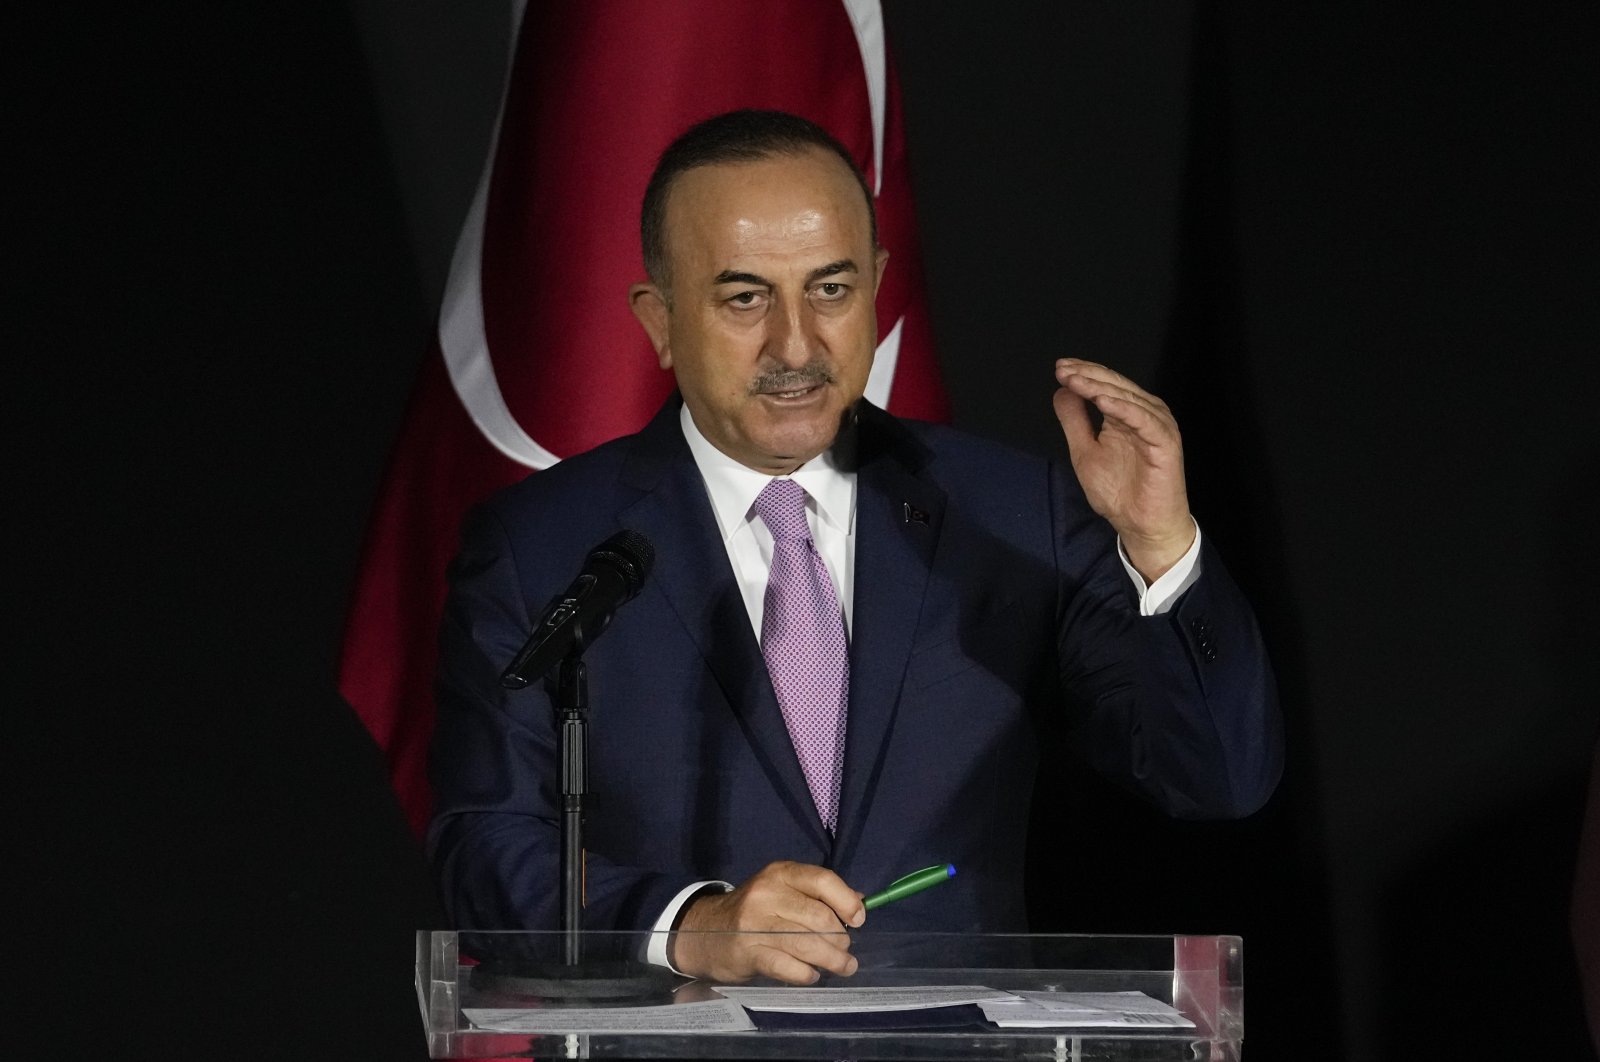  Foreign Minister Mevlüt Çavuşoğlu speaks after a bilateral meeting with his Panamanian counterpart at the Simon Bolivar foreign ministry headquarters in Panama City, Thursday, April 28, 2022. (AP File Photo)